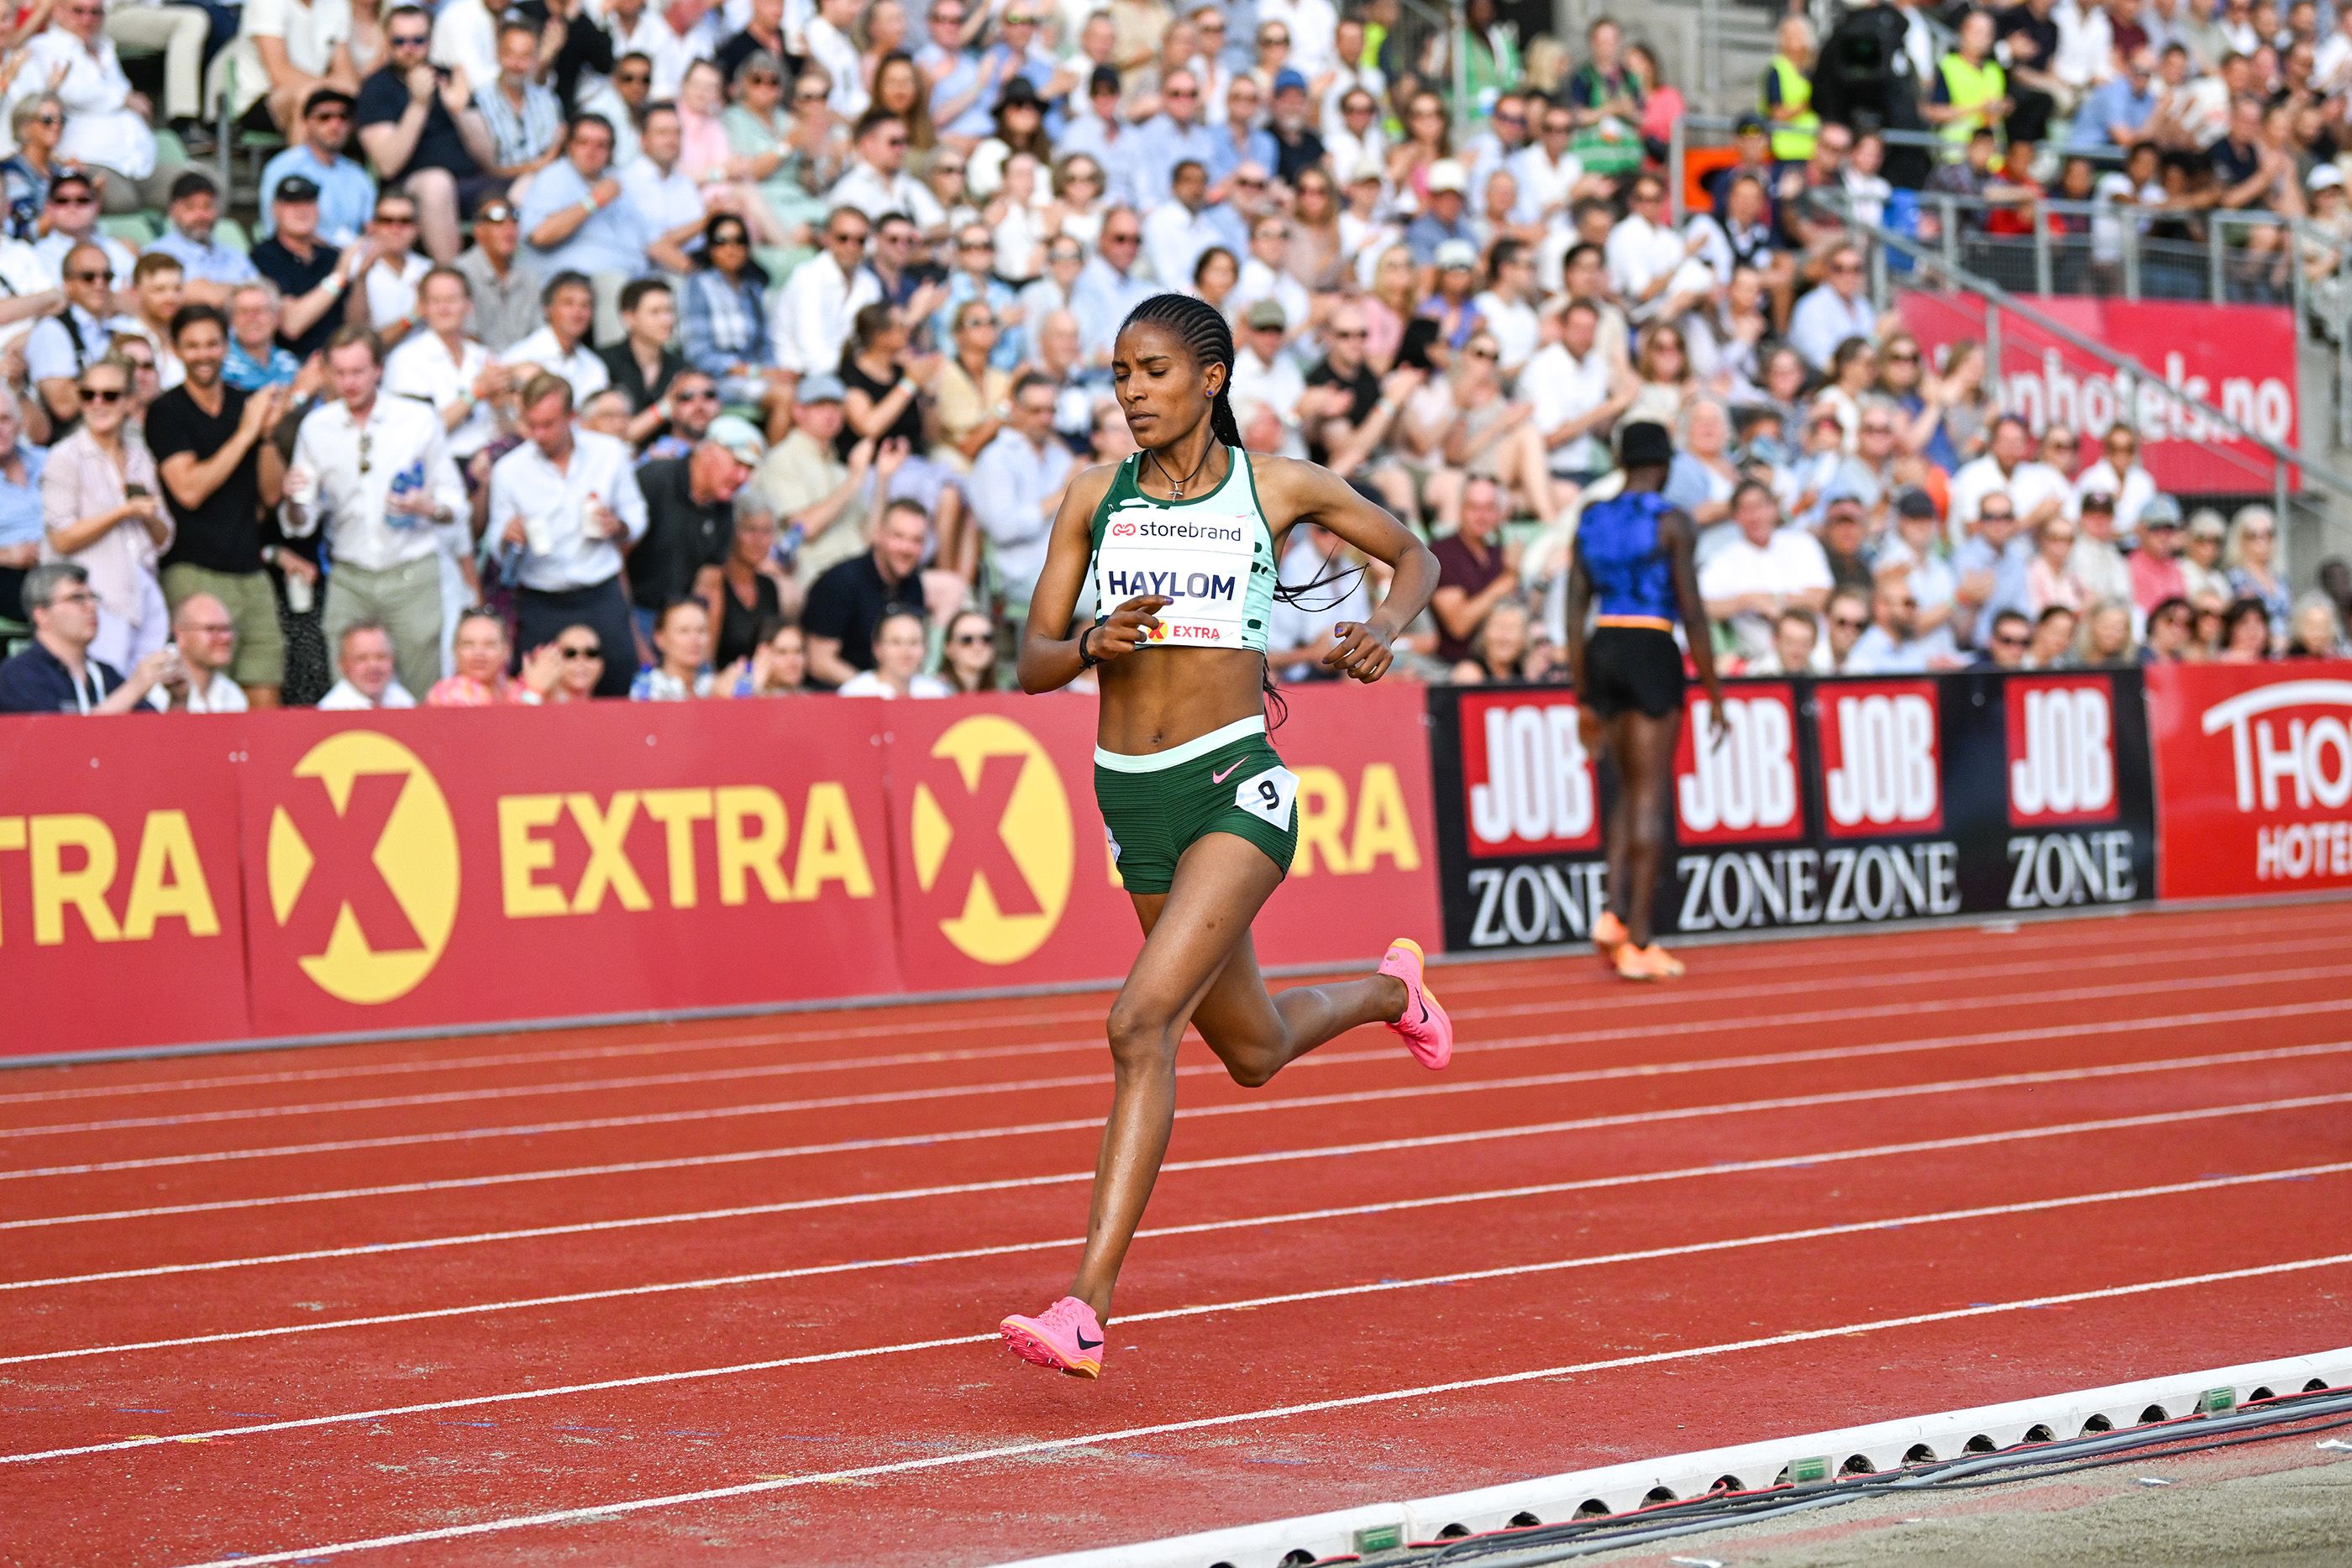 Birke Haylom on her way to a world U20 mile record in Oslo